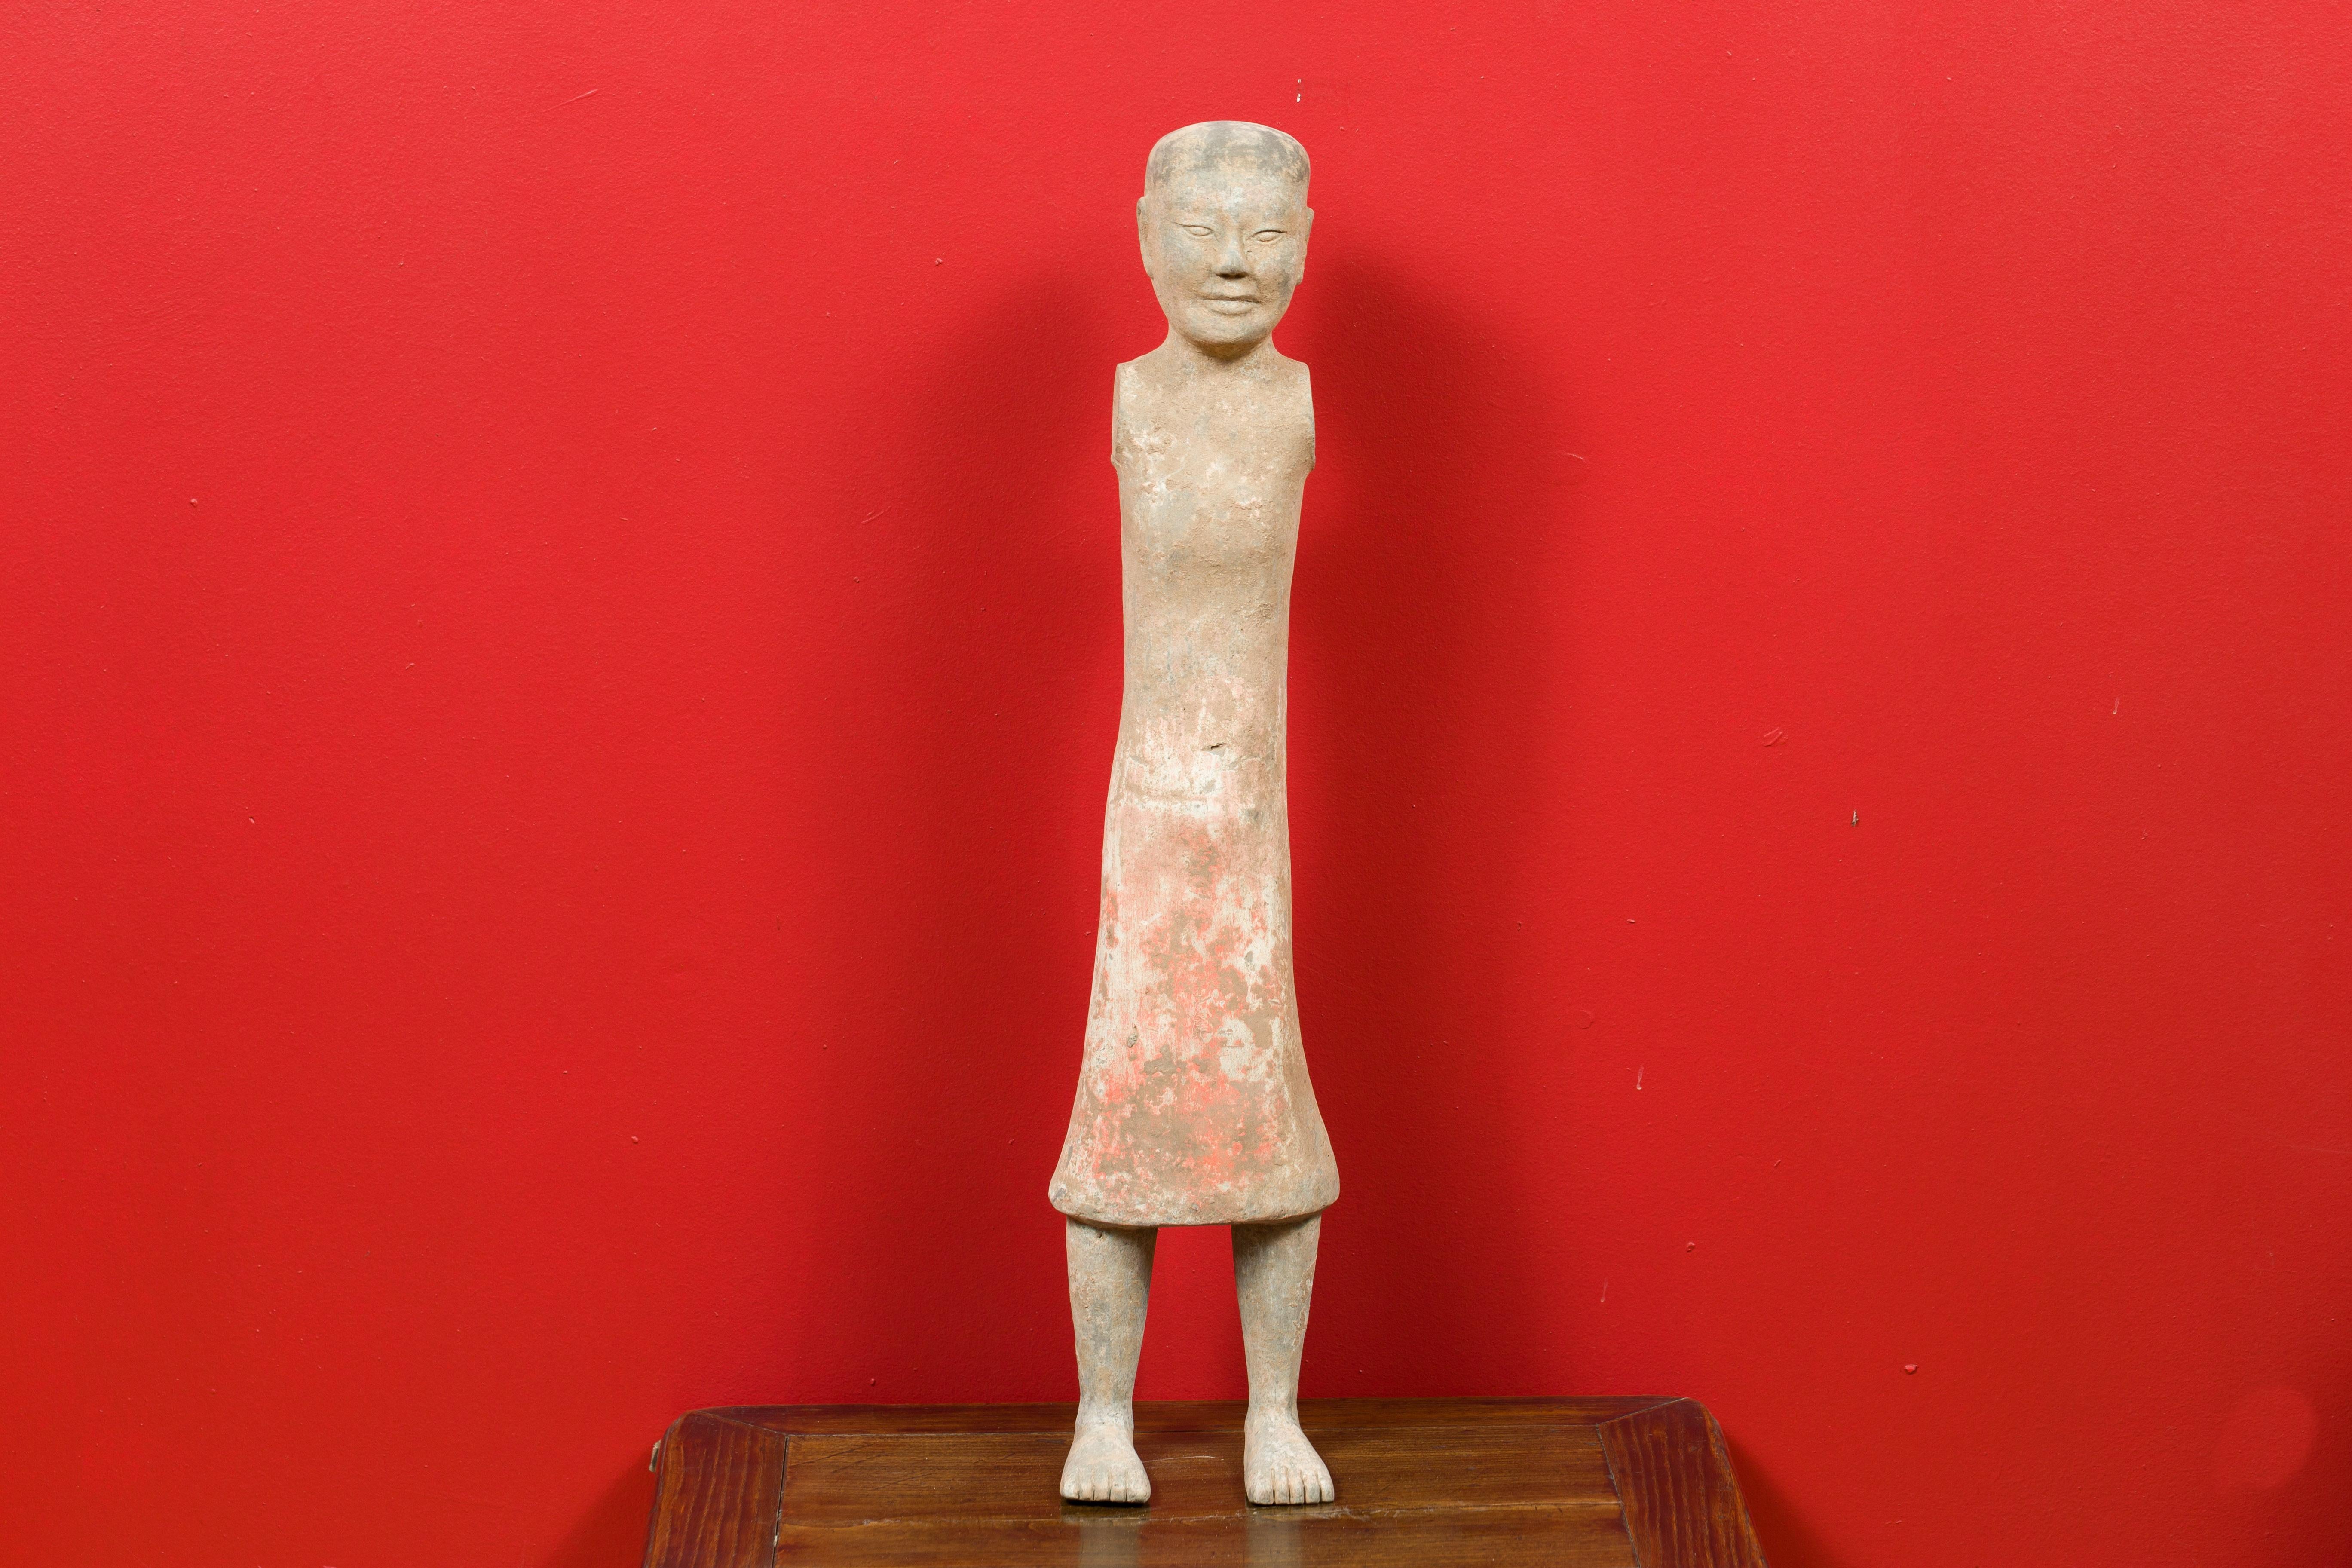 A Chinese Western Han dynasty period armless figurine with original polychromy. Born in China during the Western Han dynasty (206 BC-24 AD), this half-naked and armless figurine features a polished surface showing its original polychrome. These